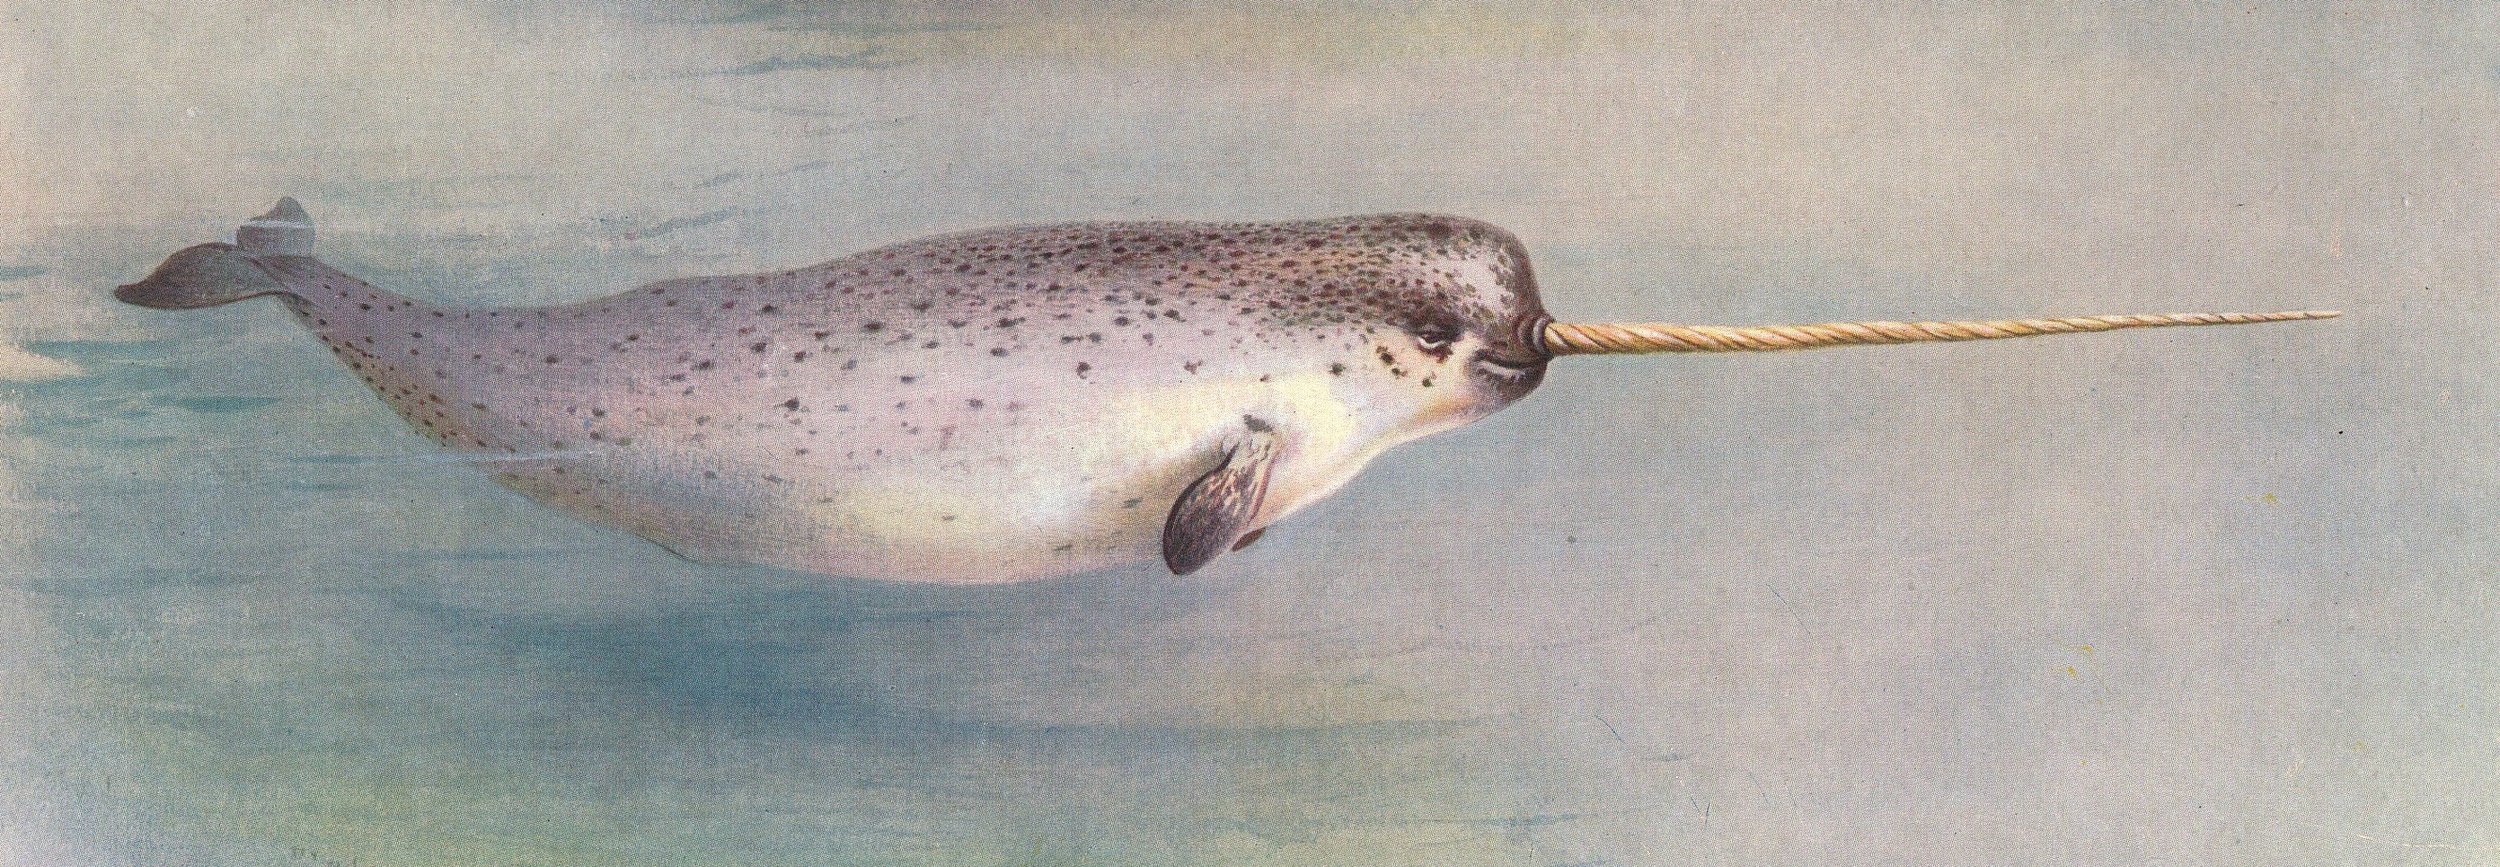 Narwhal White_Whale_Narwhal_150 copy.JPG